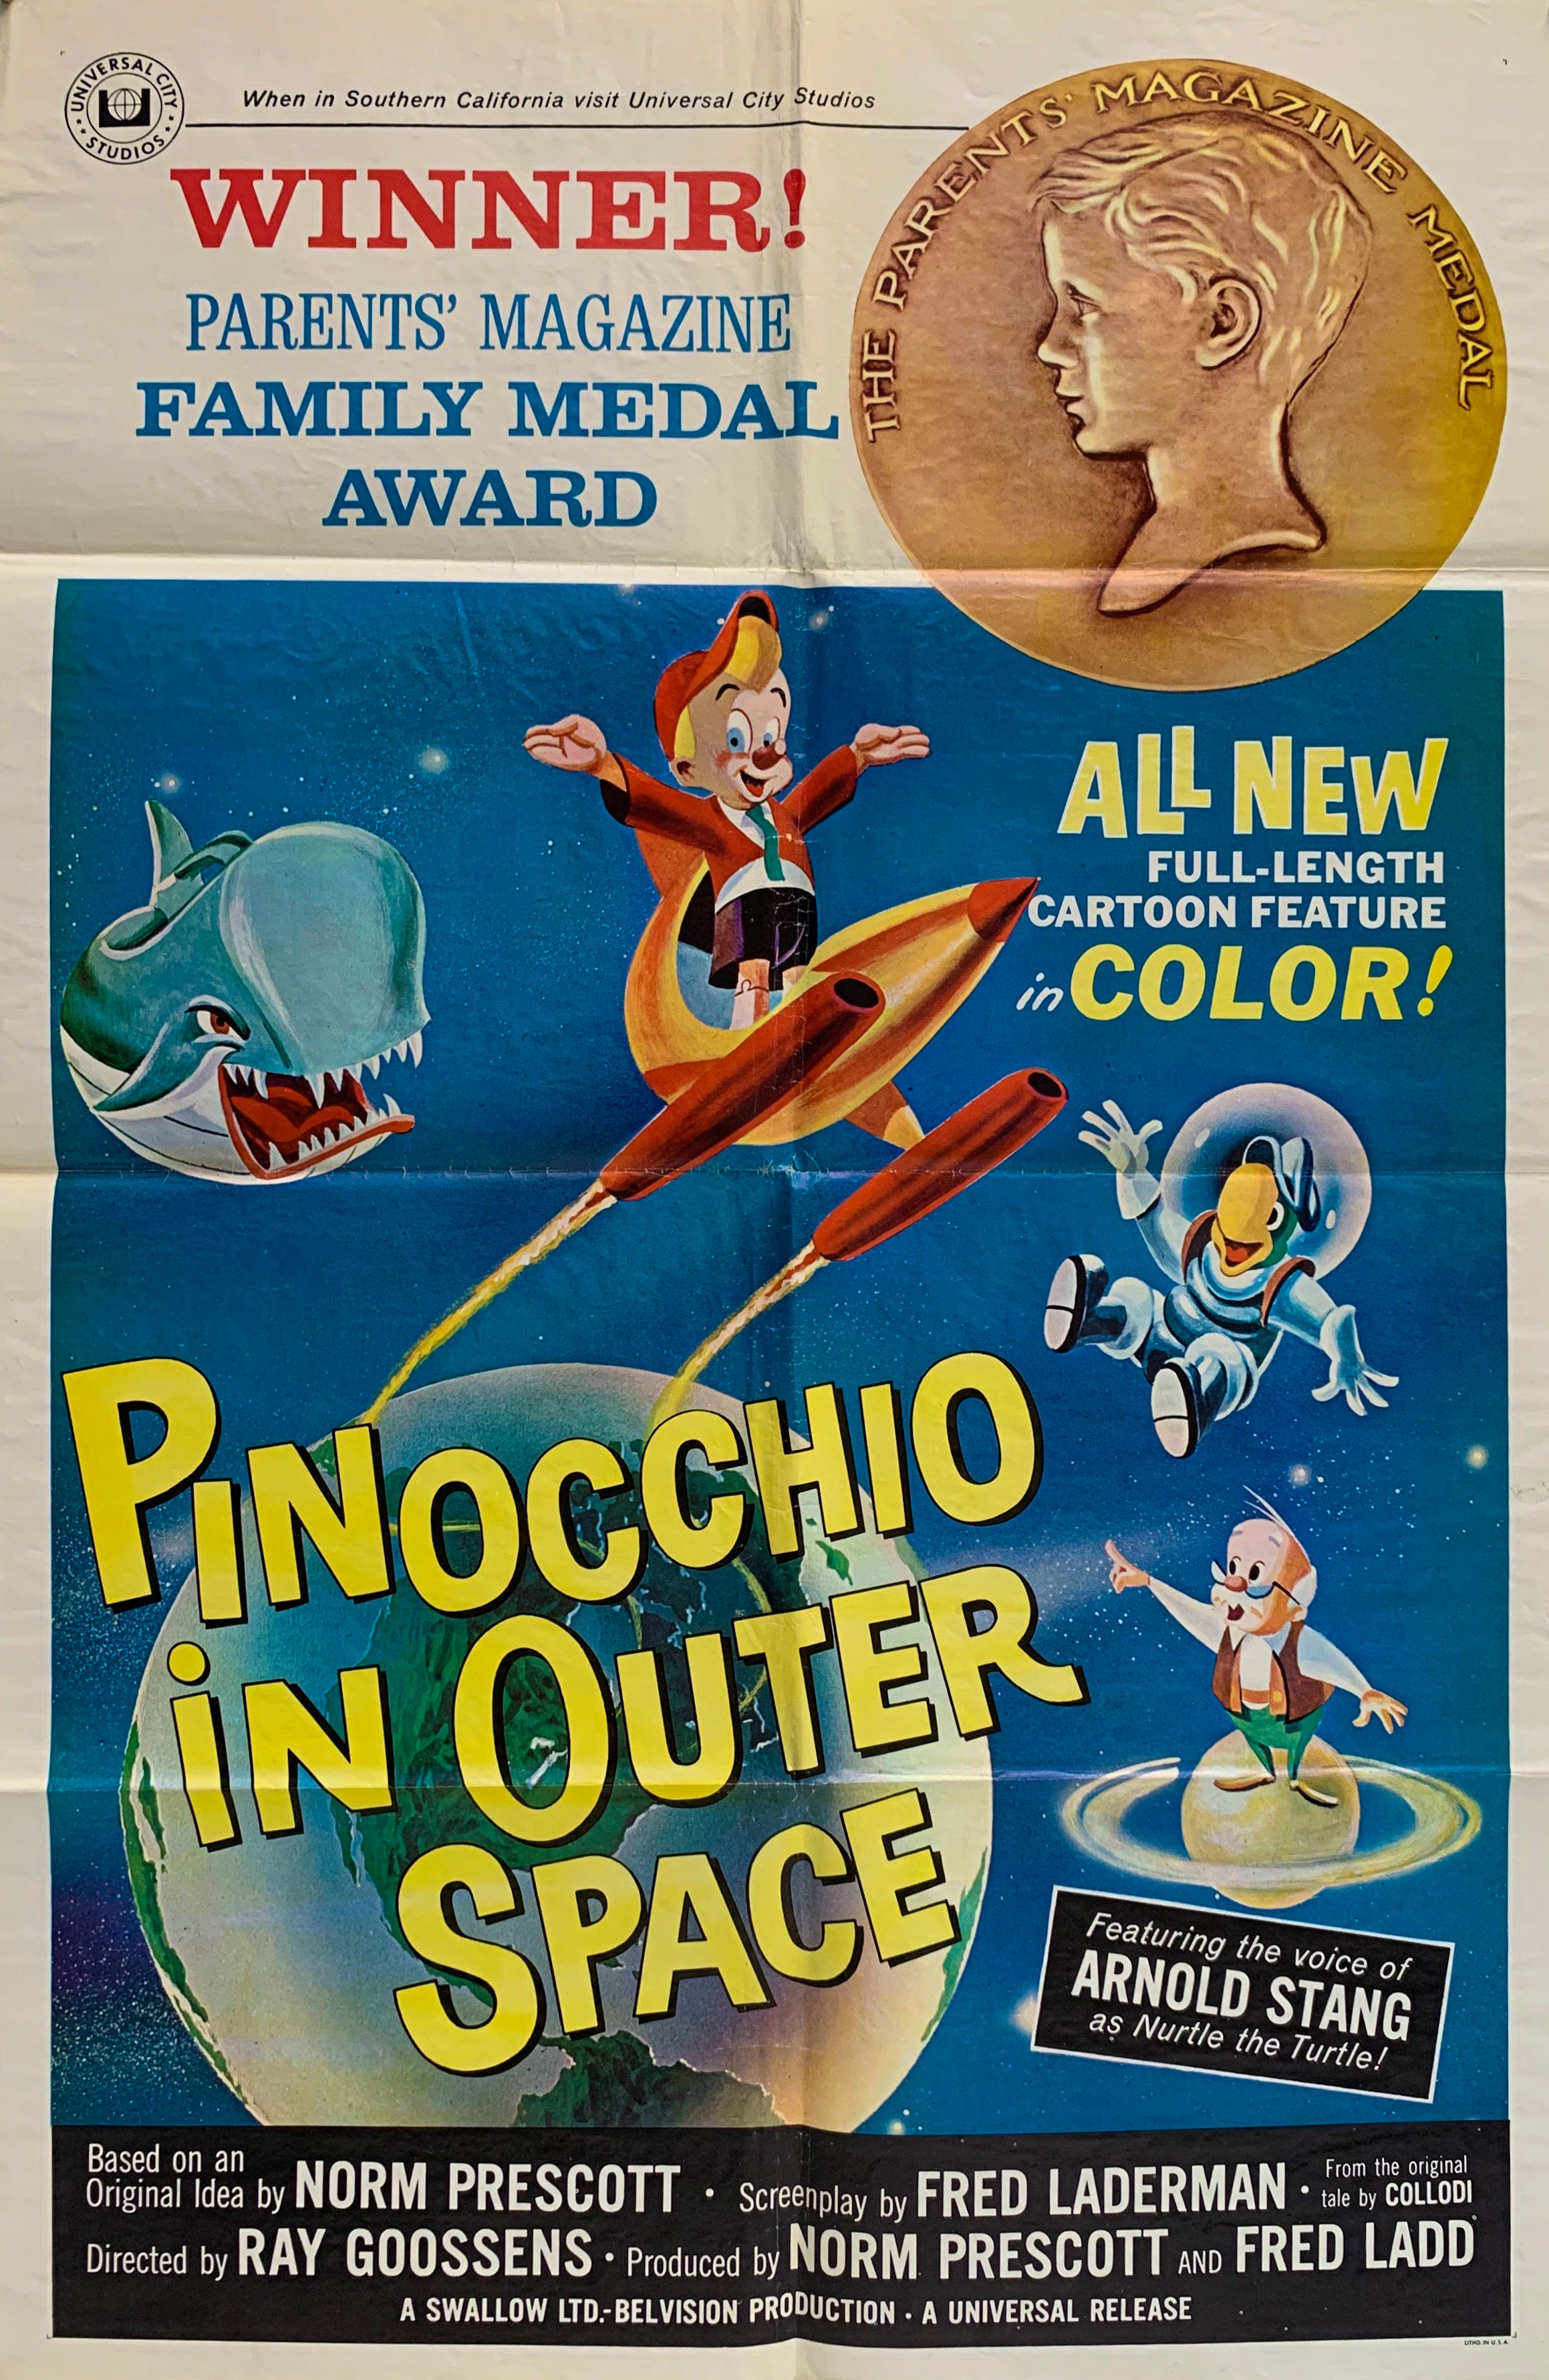 Pinocchio in Outer Space (1965) Screenshot 3